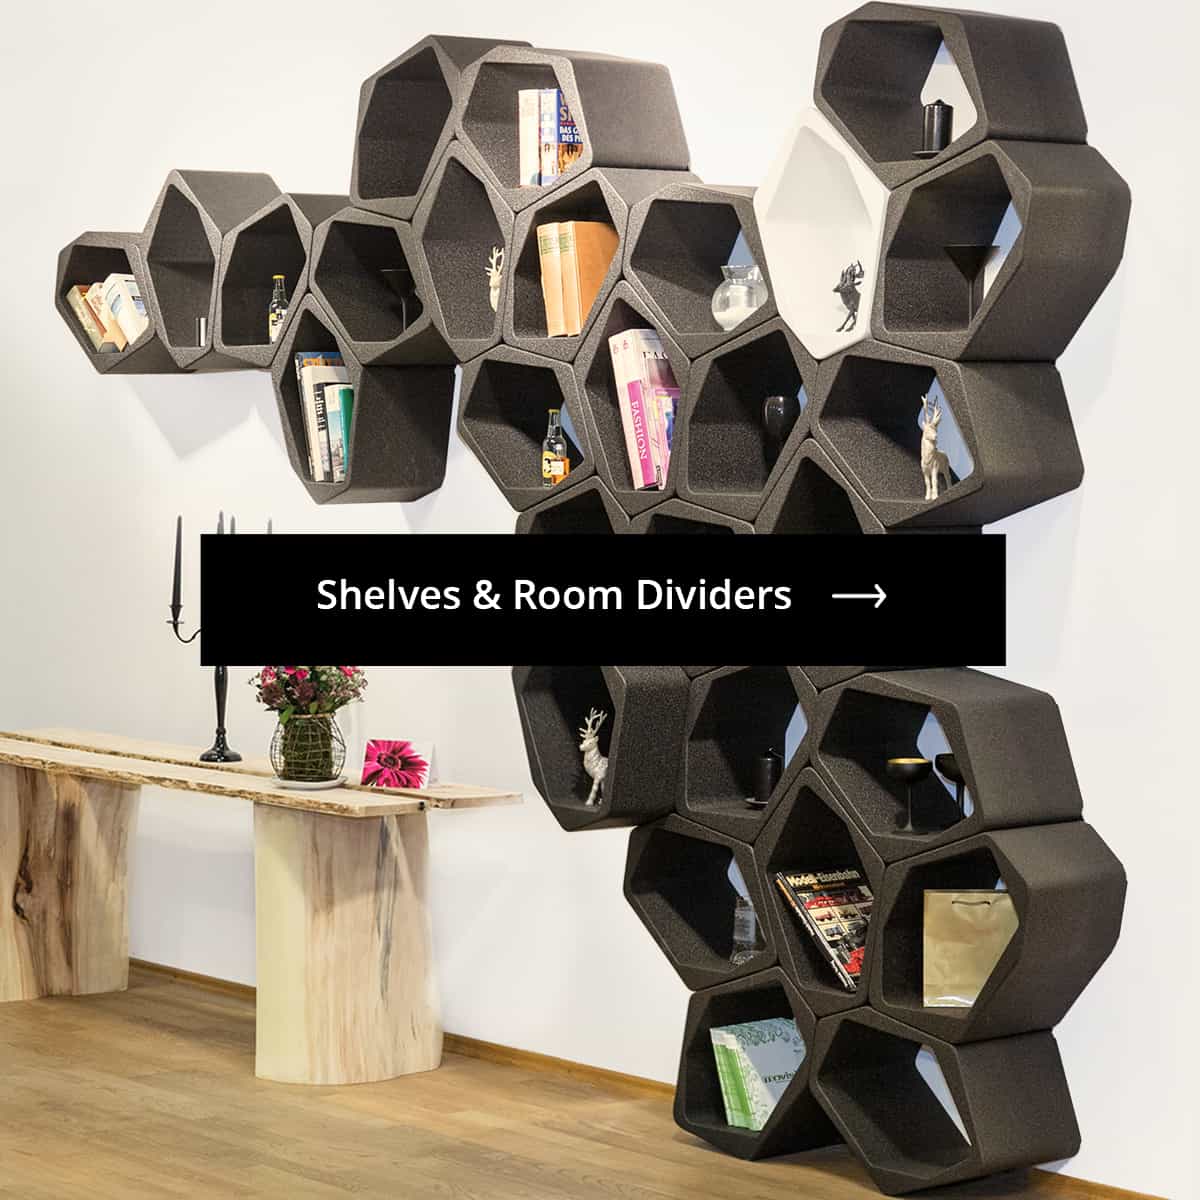 Modular shelves and room dividers